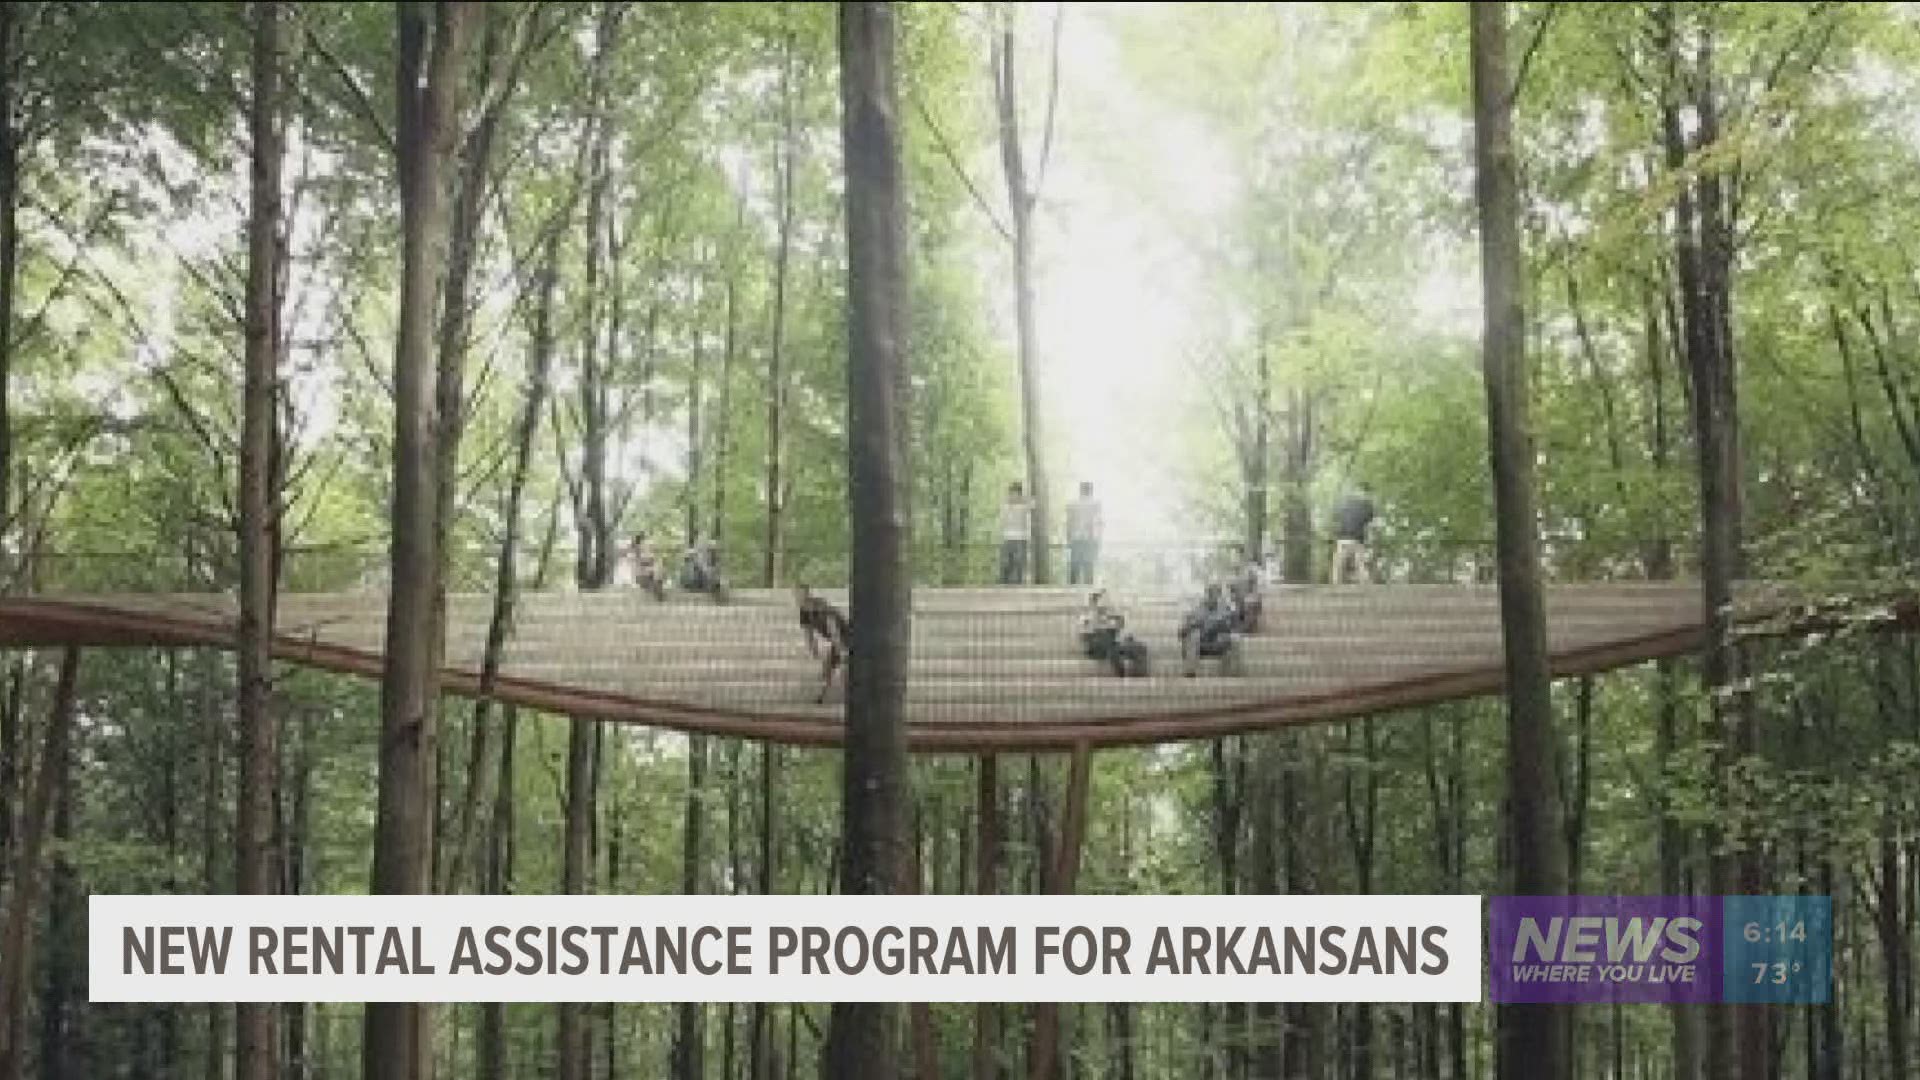 It could be the longest canopy trail in the United States if completed.